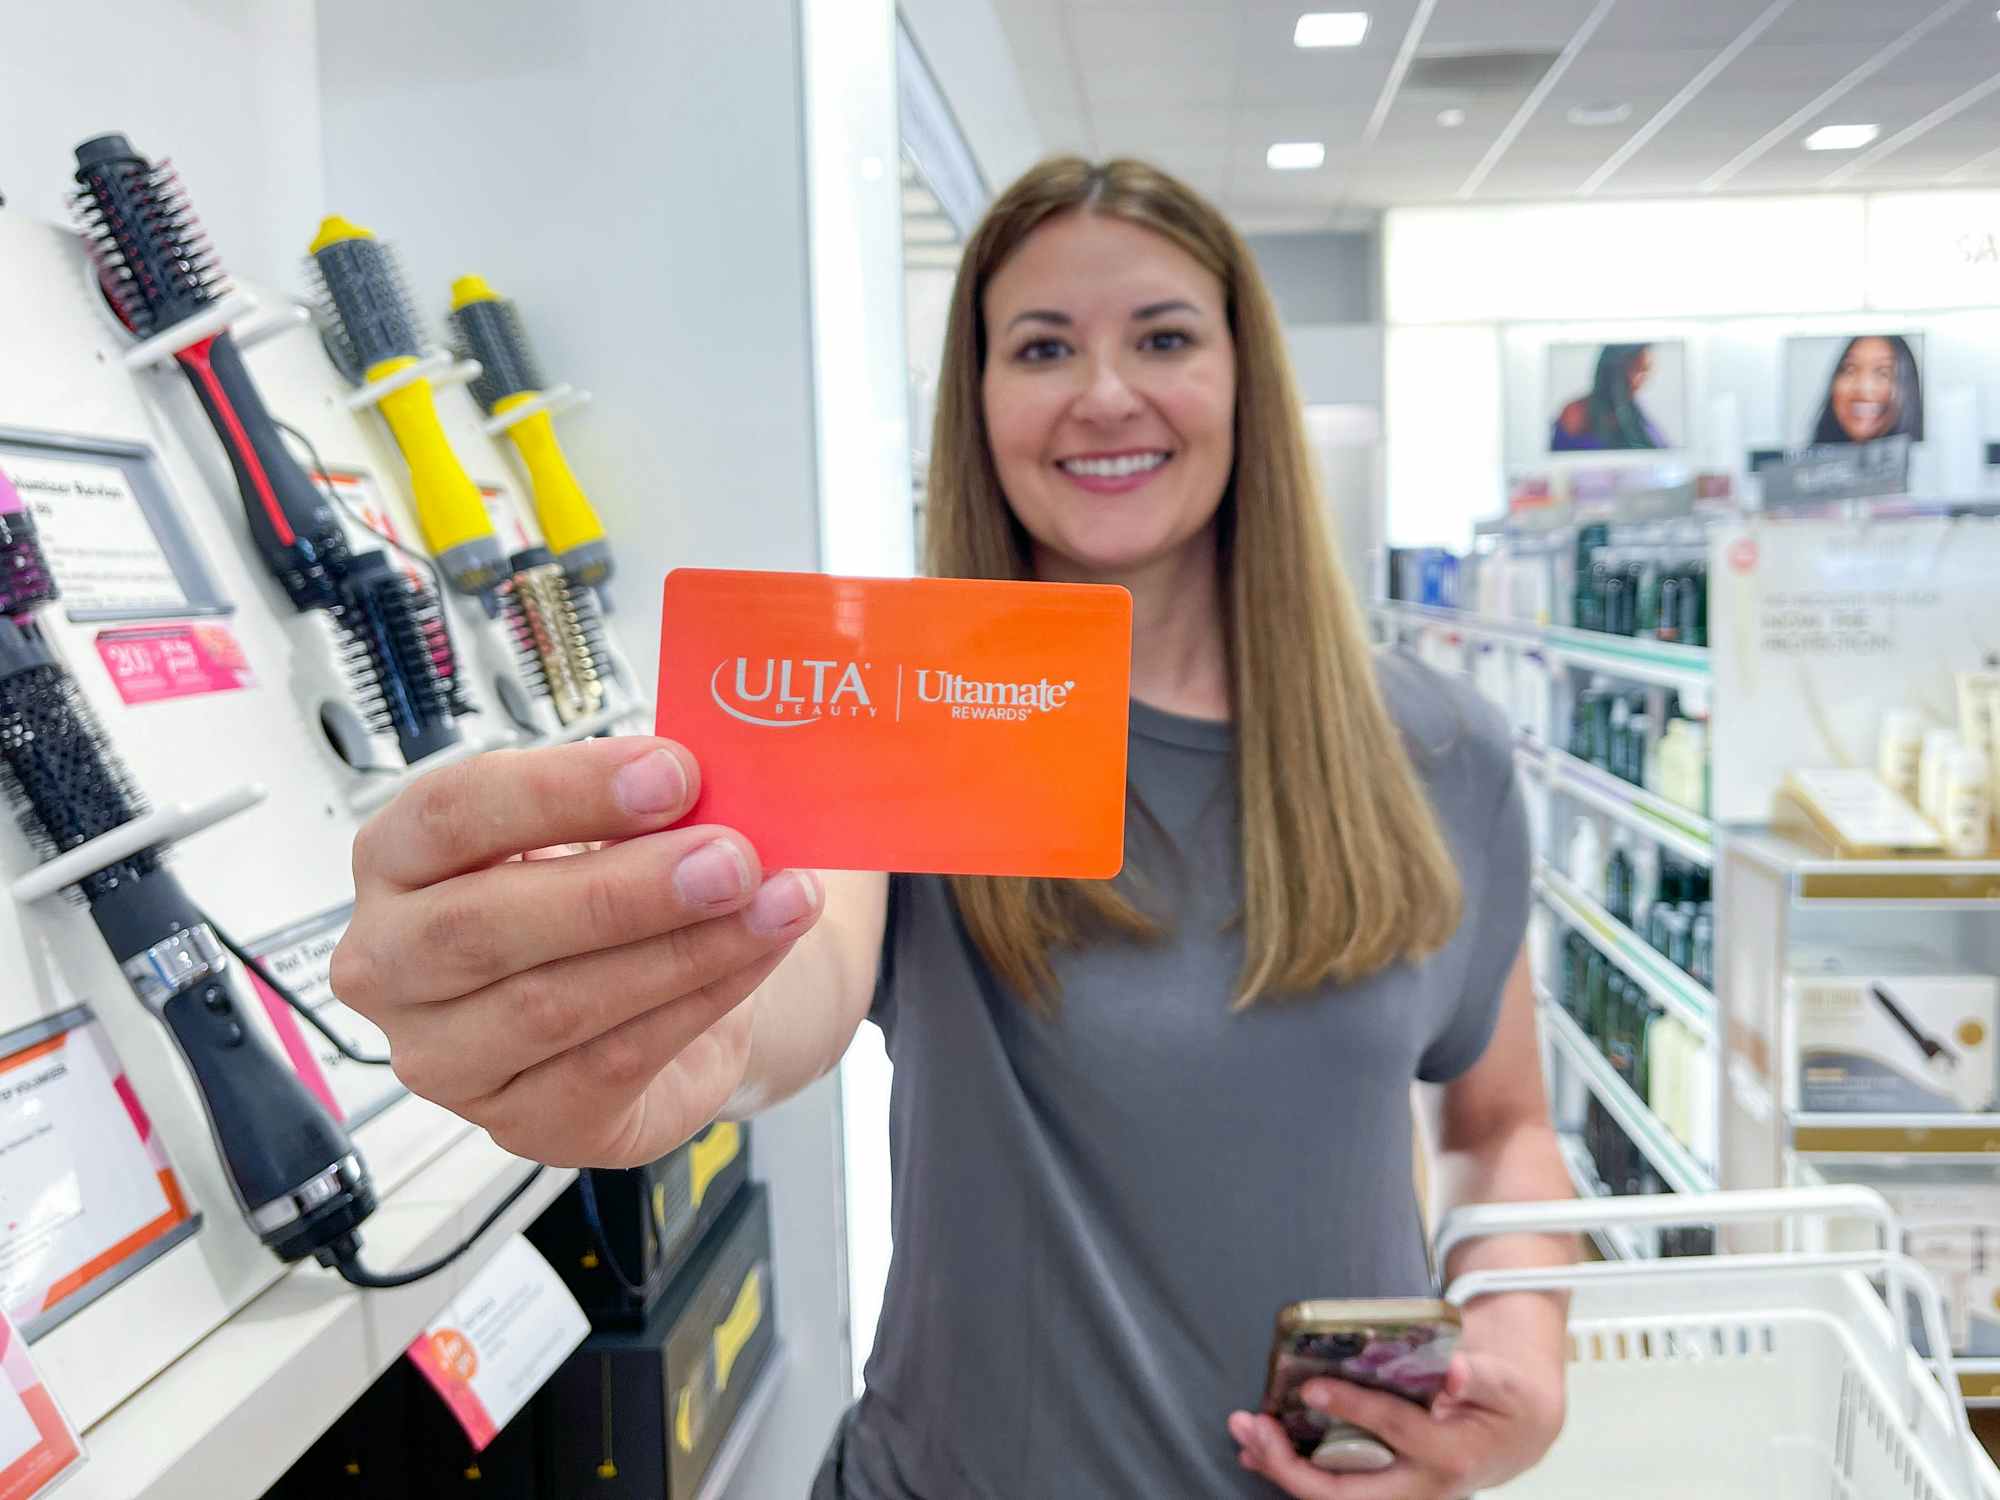 A person holding up their Ulta credit card in front of some styling tools on display